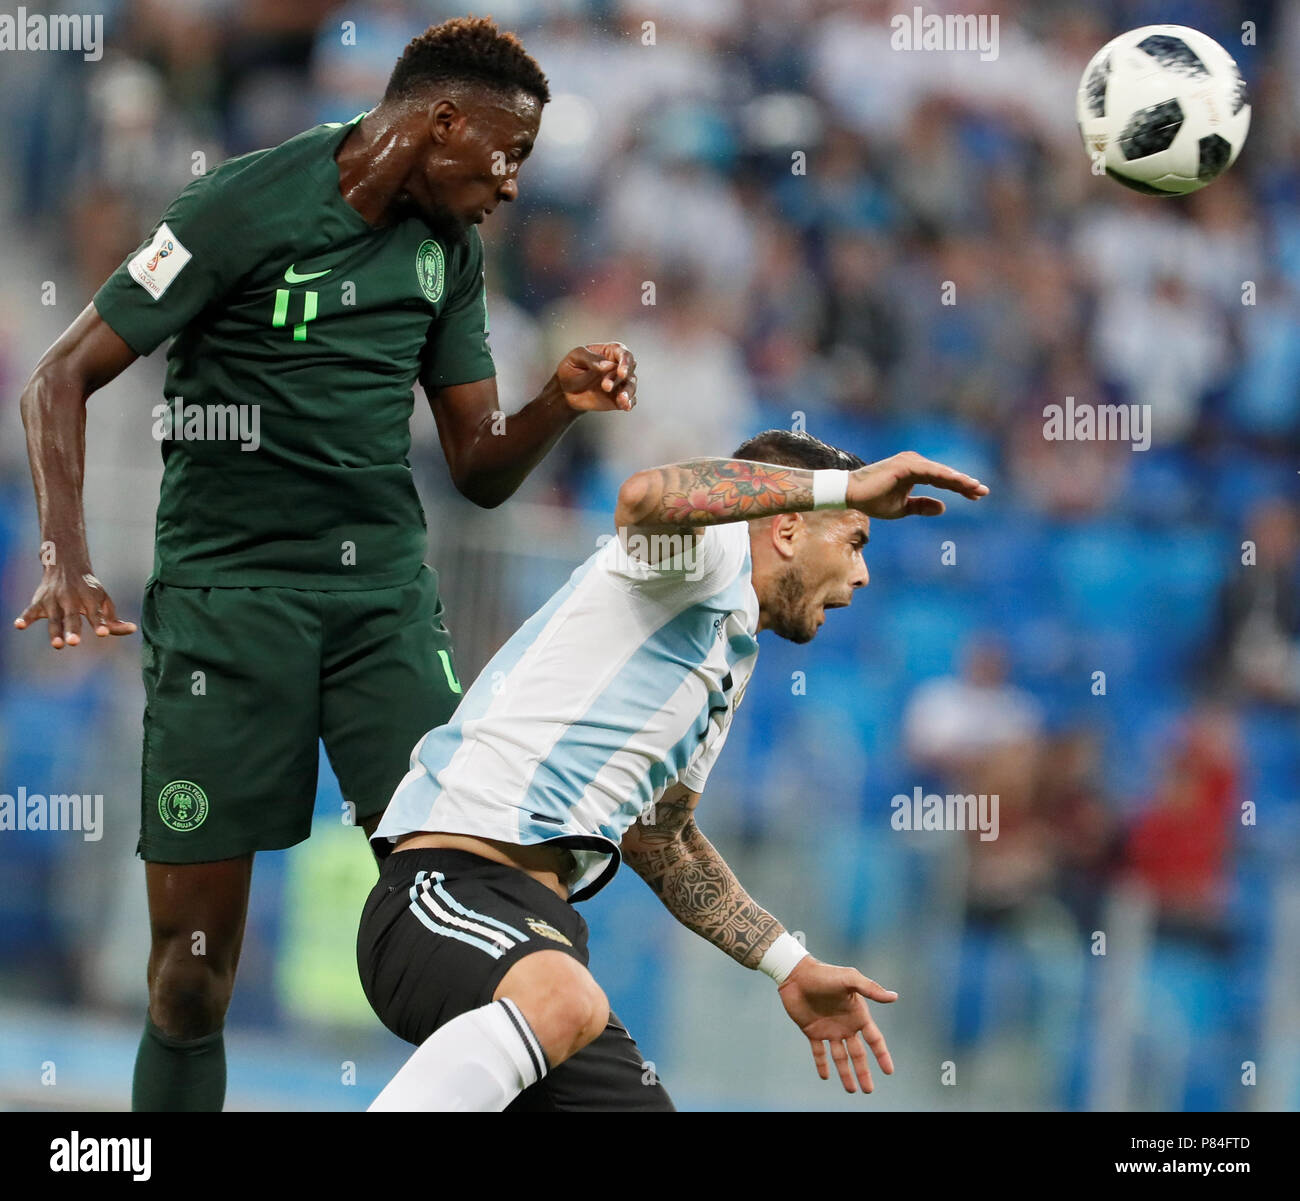 SAINT PETERSBURG, RUSSIA - JUNE 26: Victor Moses (L) of Nigeria national team and Ever Banega of Argentina national team vie for a header during the 2018 FIFA World Cup Russia group D match between Nigeria and Argentina at Saint Petersburg Stadium on June 26, 2018 in Saint Petersburg, Russia. (MB Media) Stock Photo